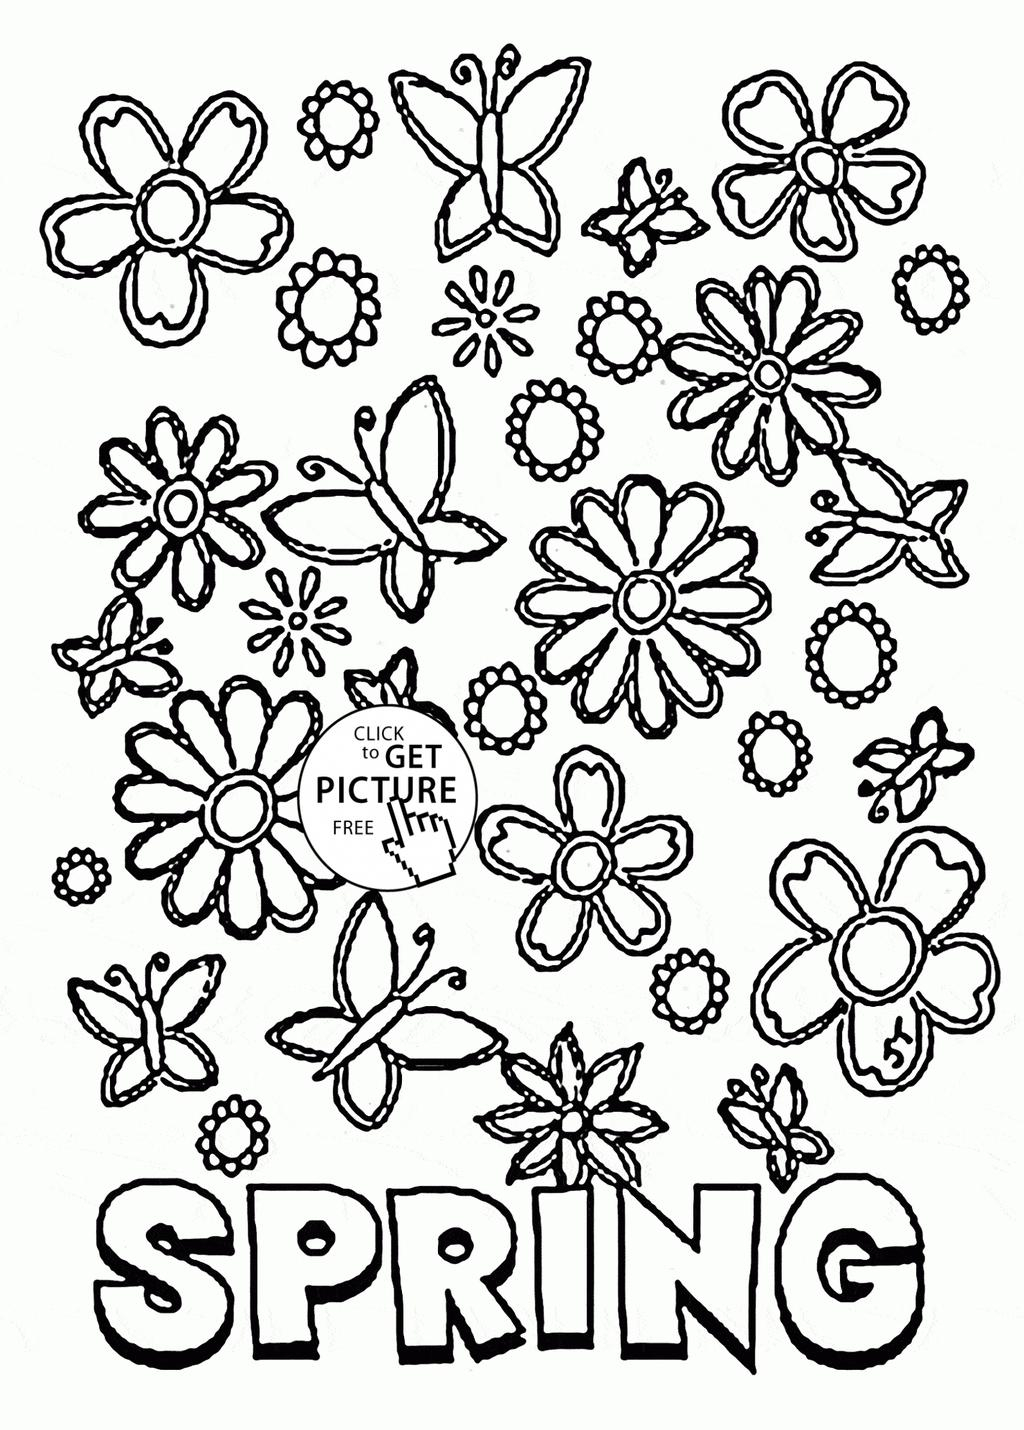 Spring Coloring Pages Springtime Coloring Pages Spring Cpaaffiliate For Adults Free